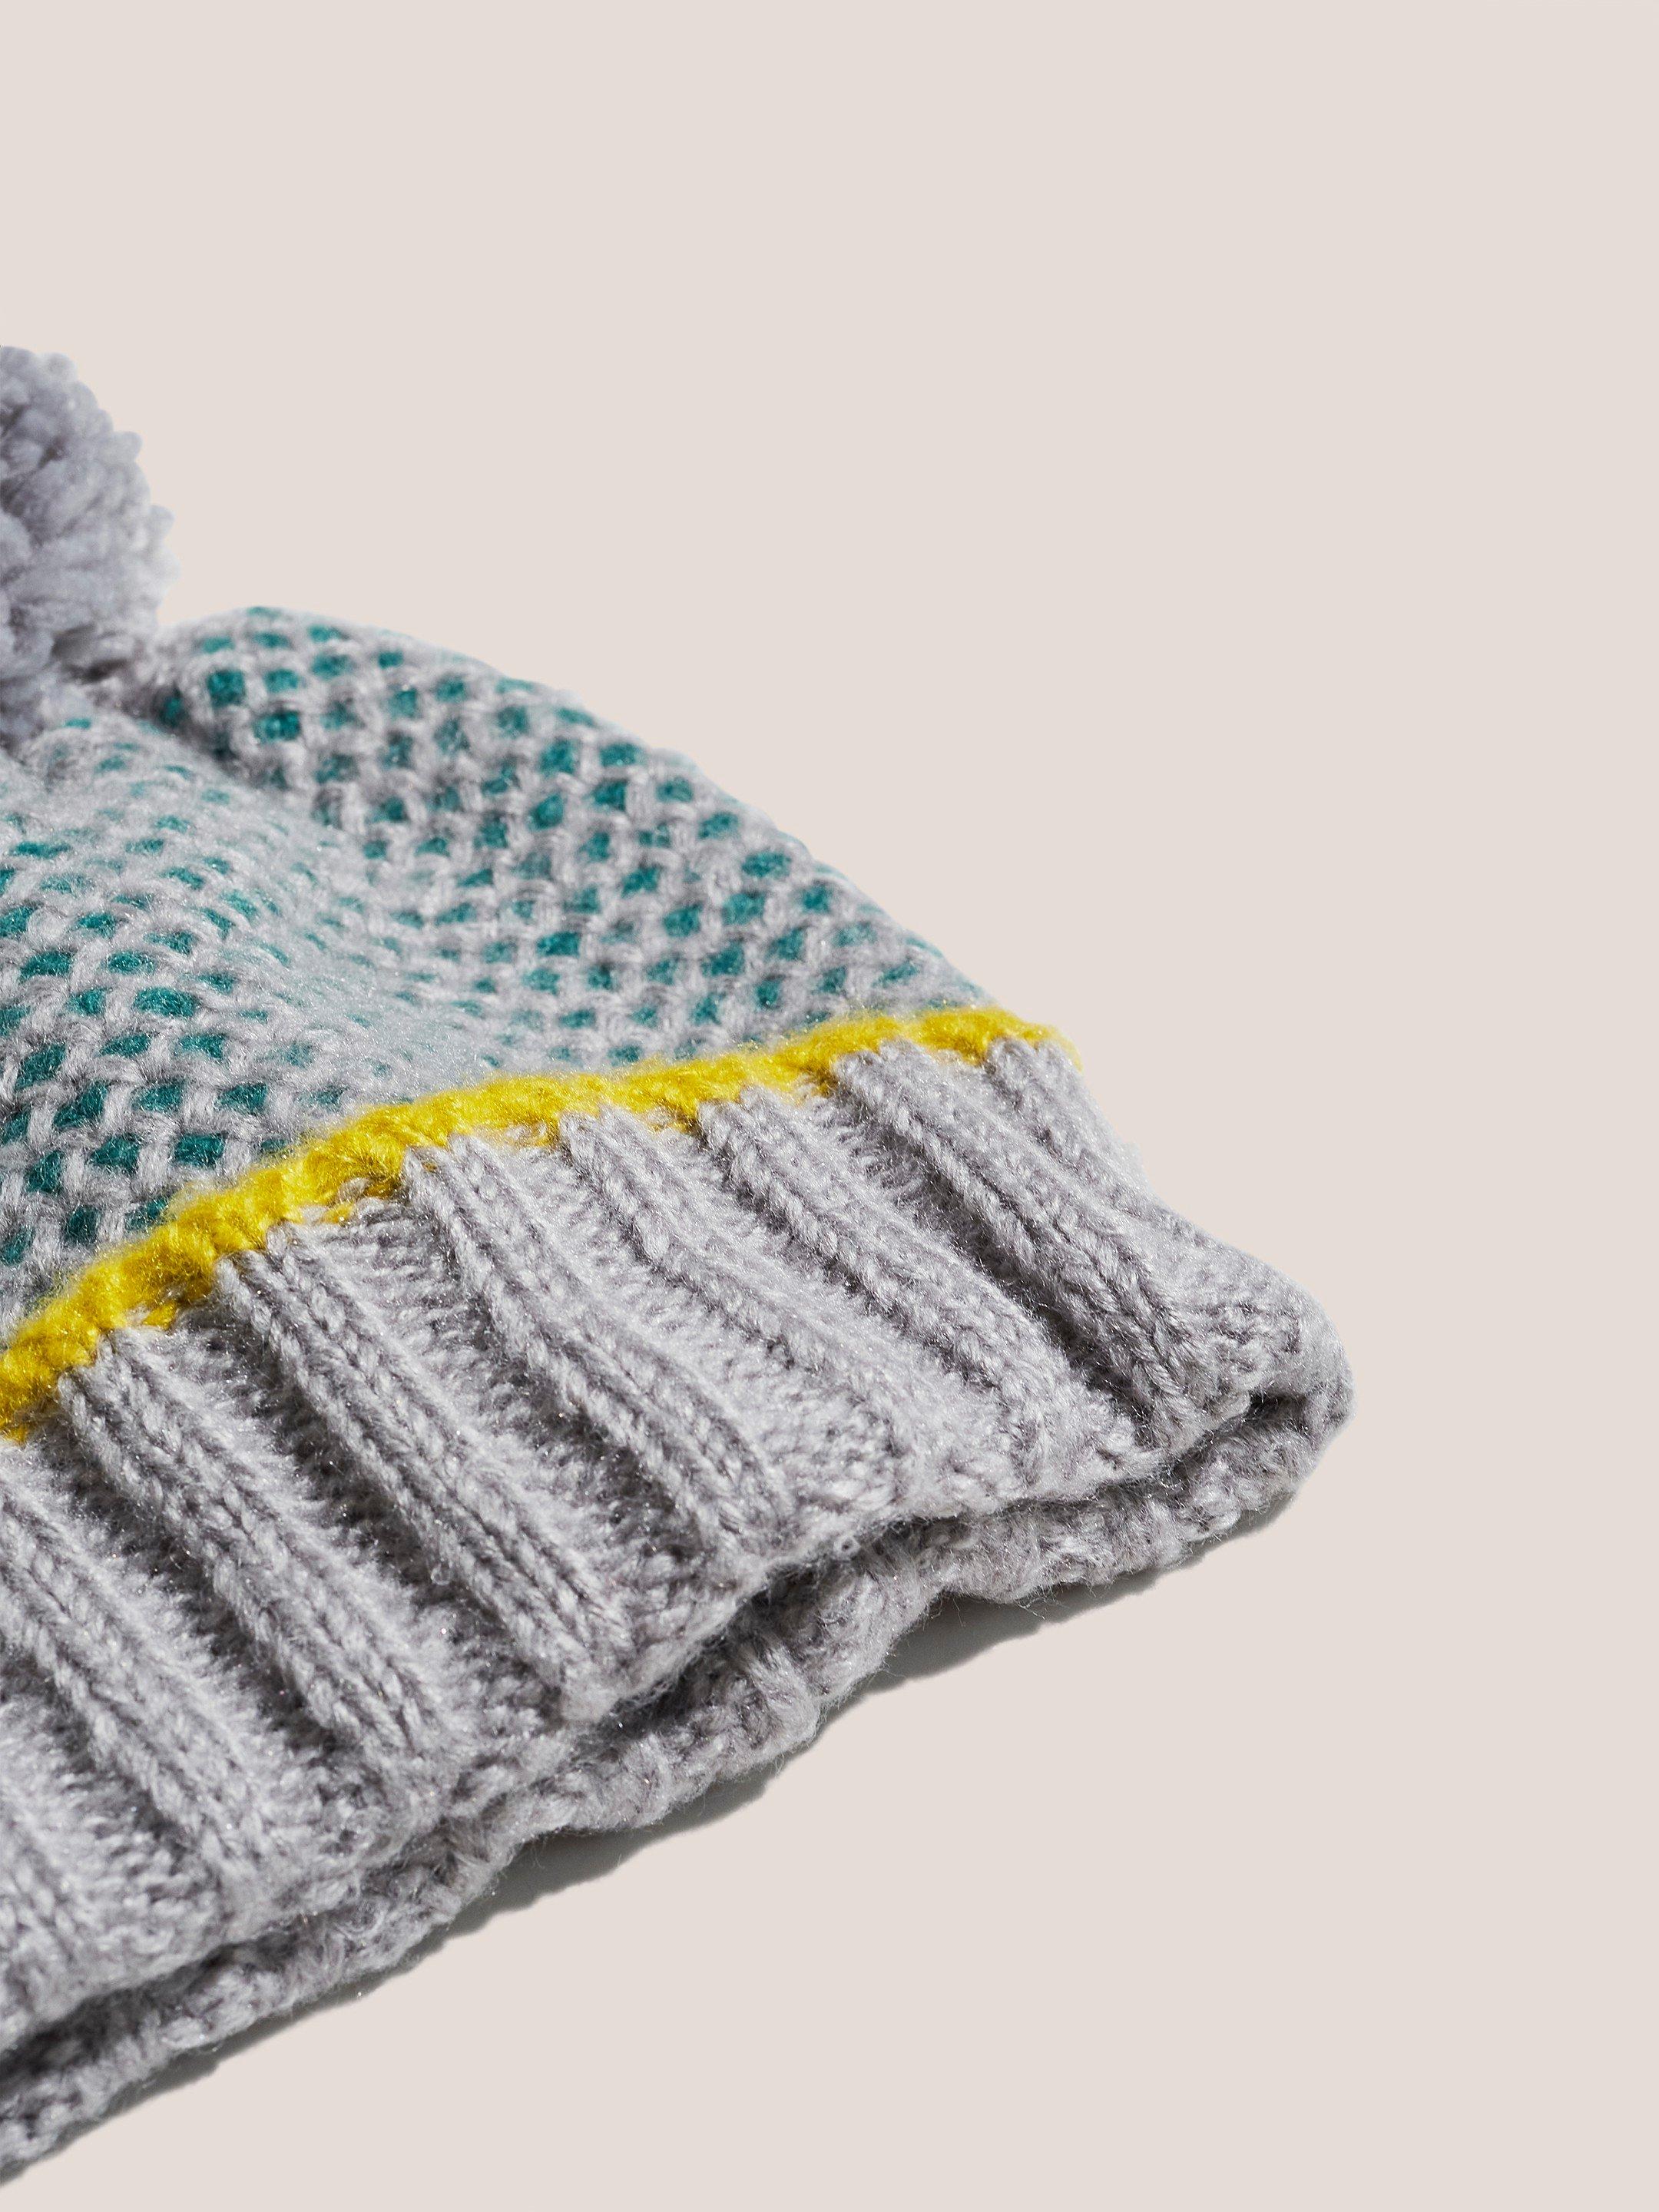 Honeycomb Knitted Hat in TEAL MLT - FLAT DETAIL